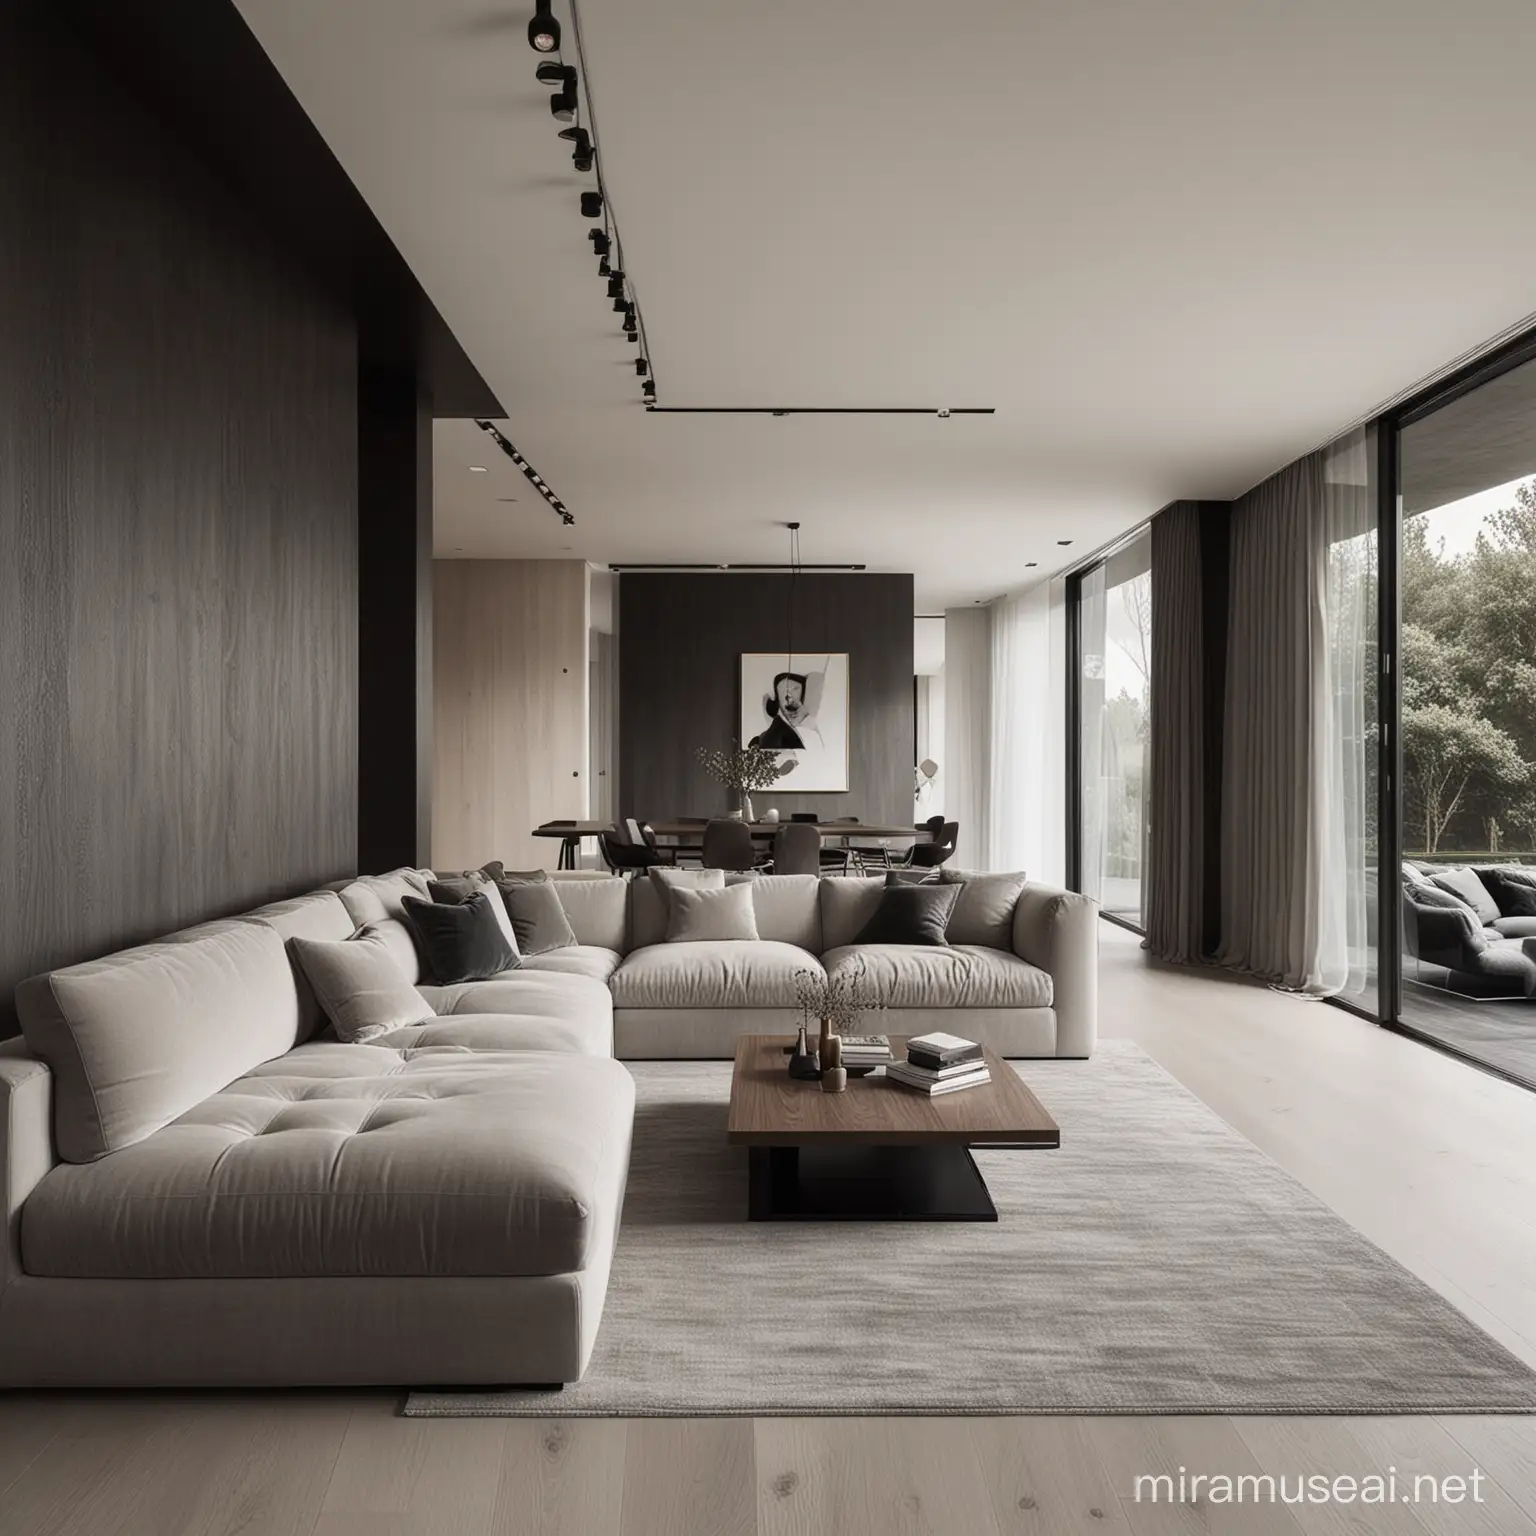 contrasting attractive interior images